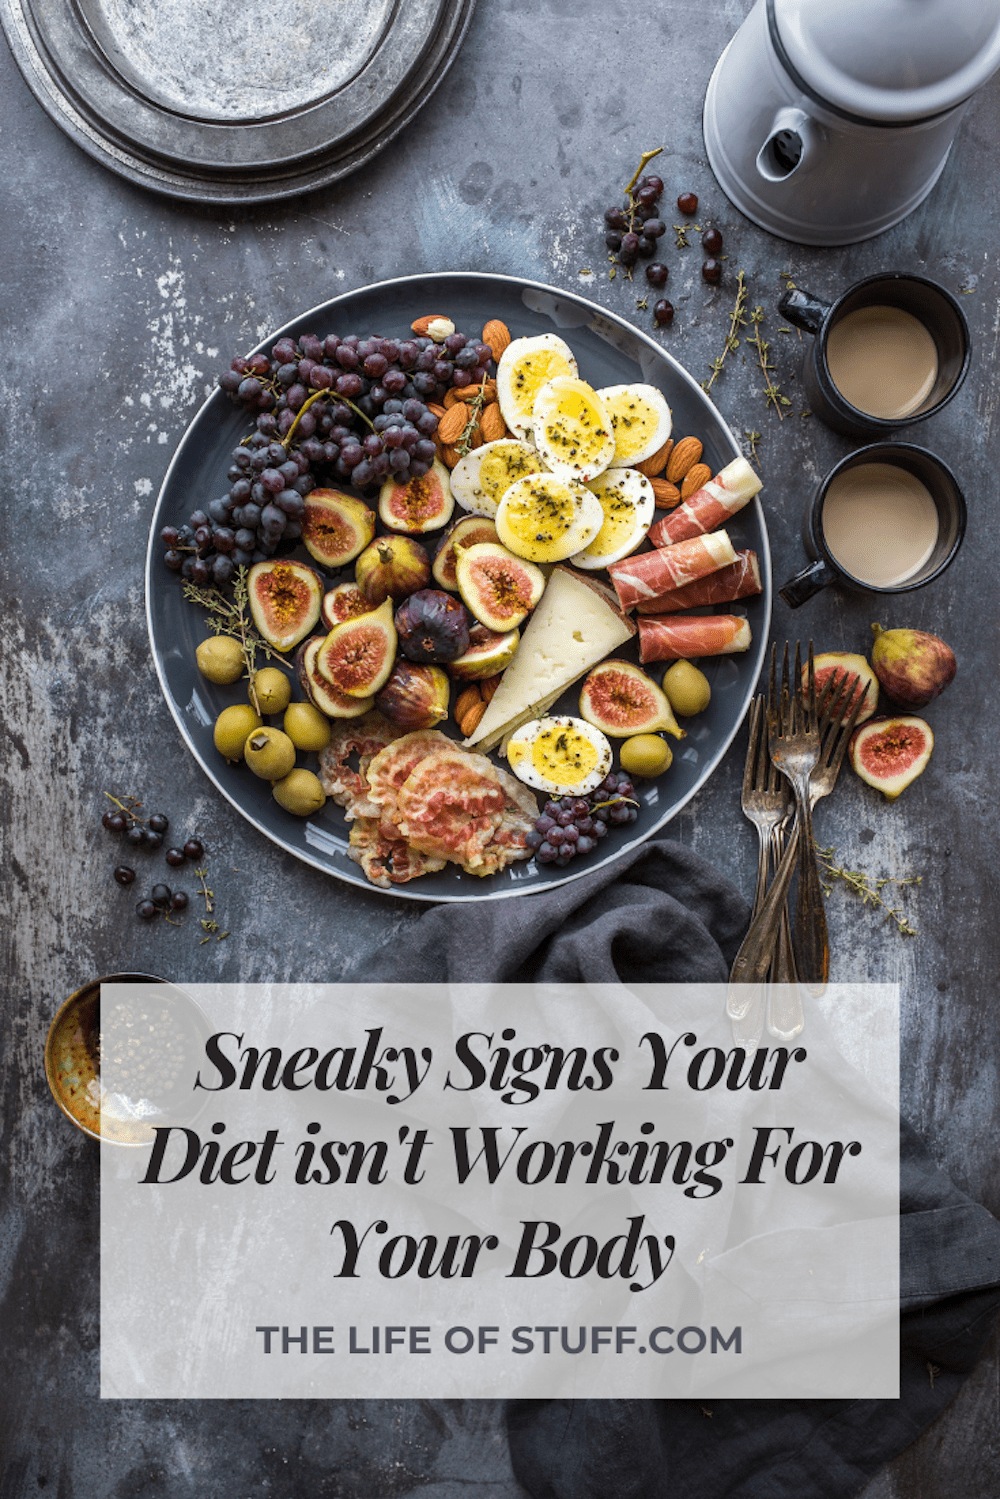 Sneaky Signs Your Diet isn't Working For Your Body - The Life of Stuff